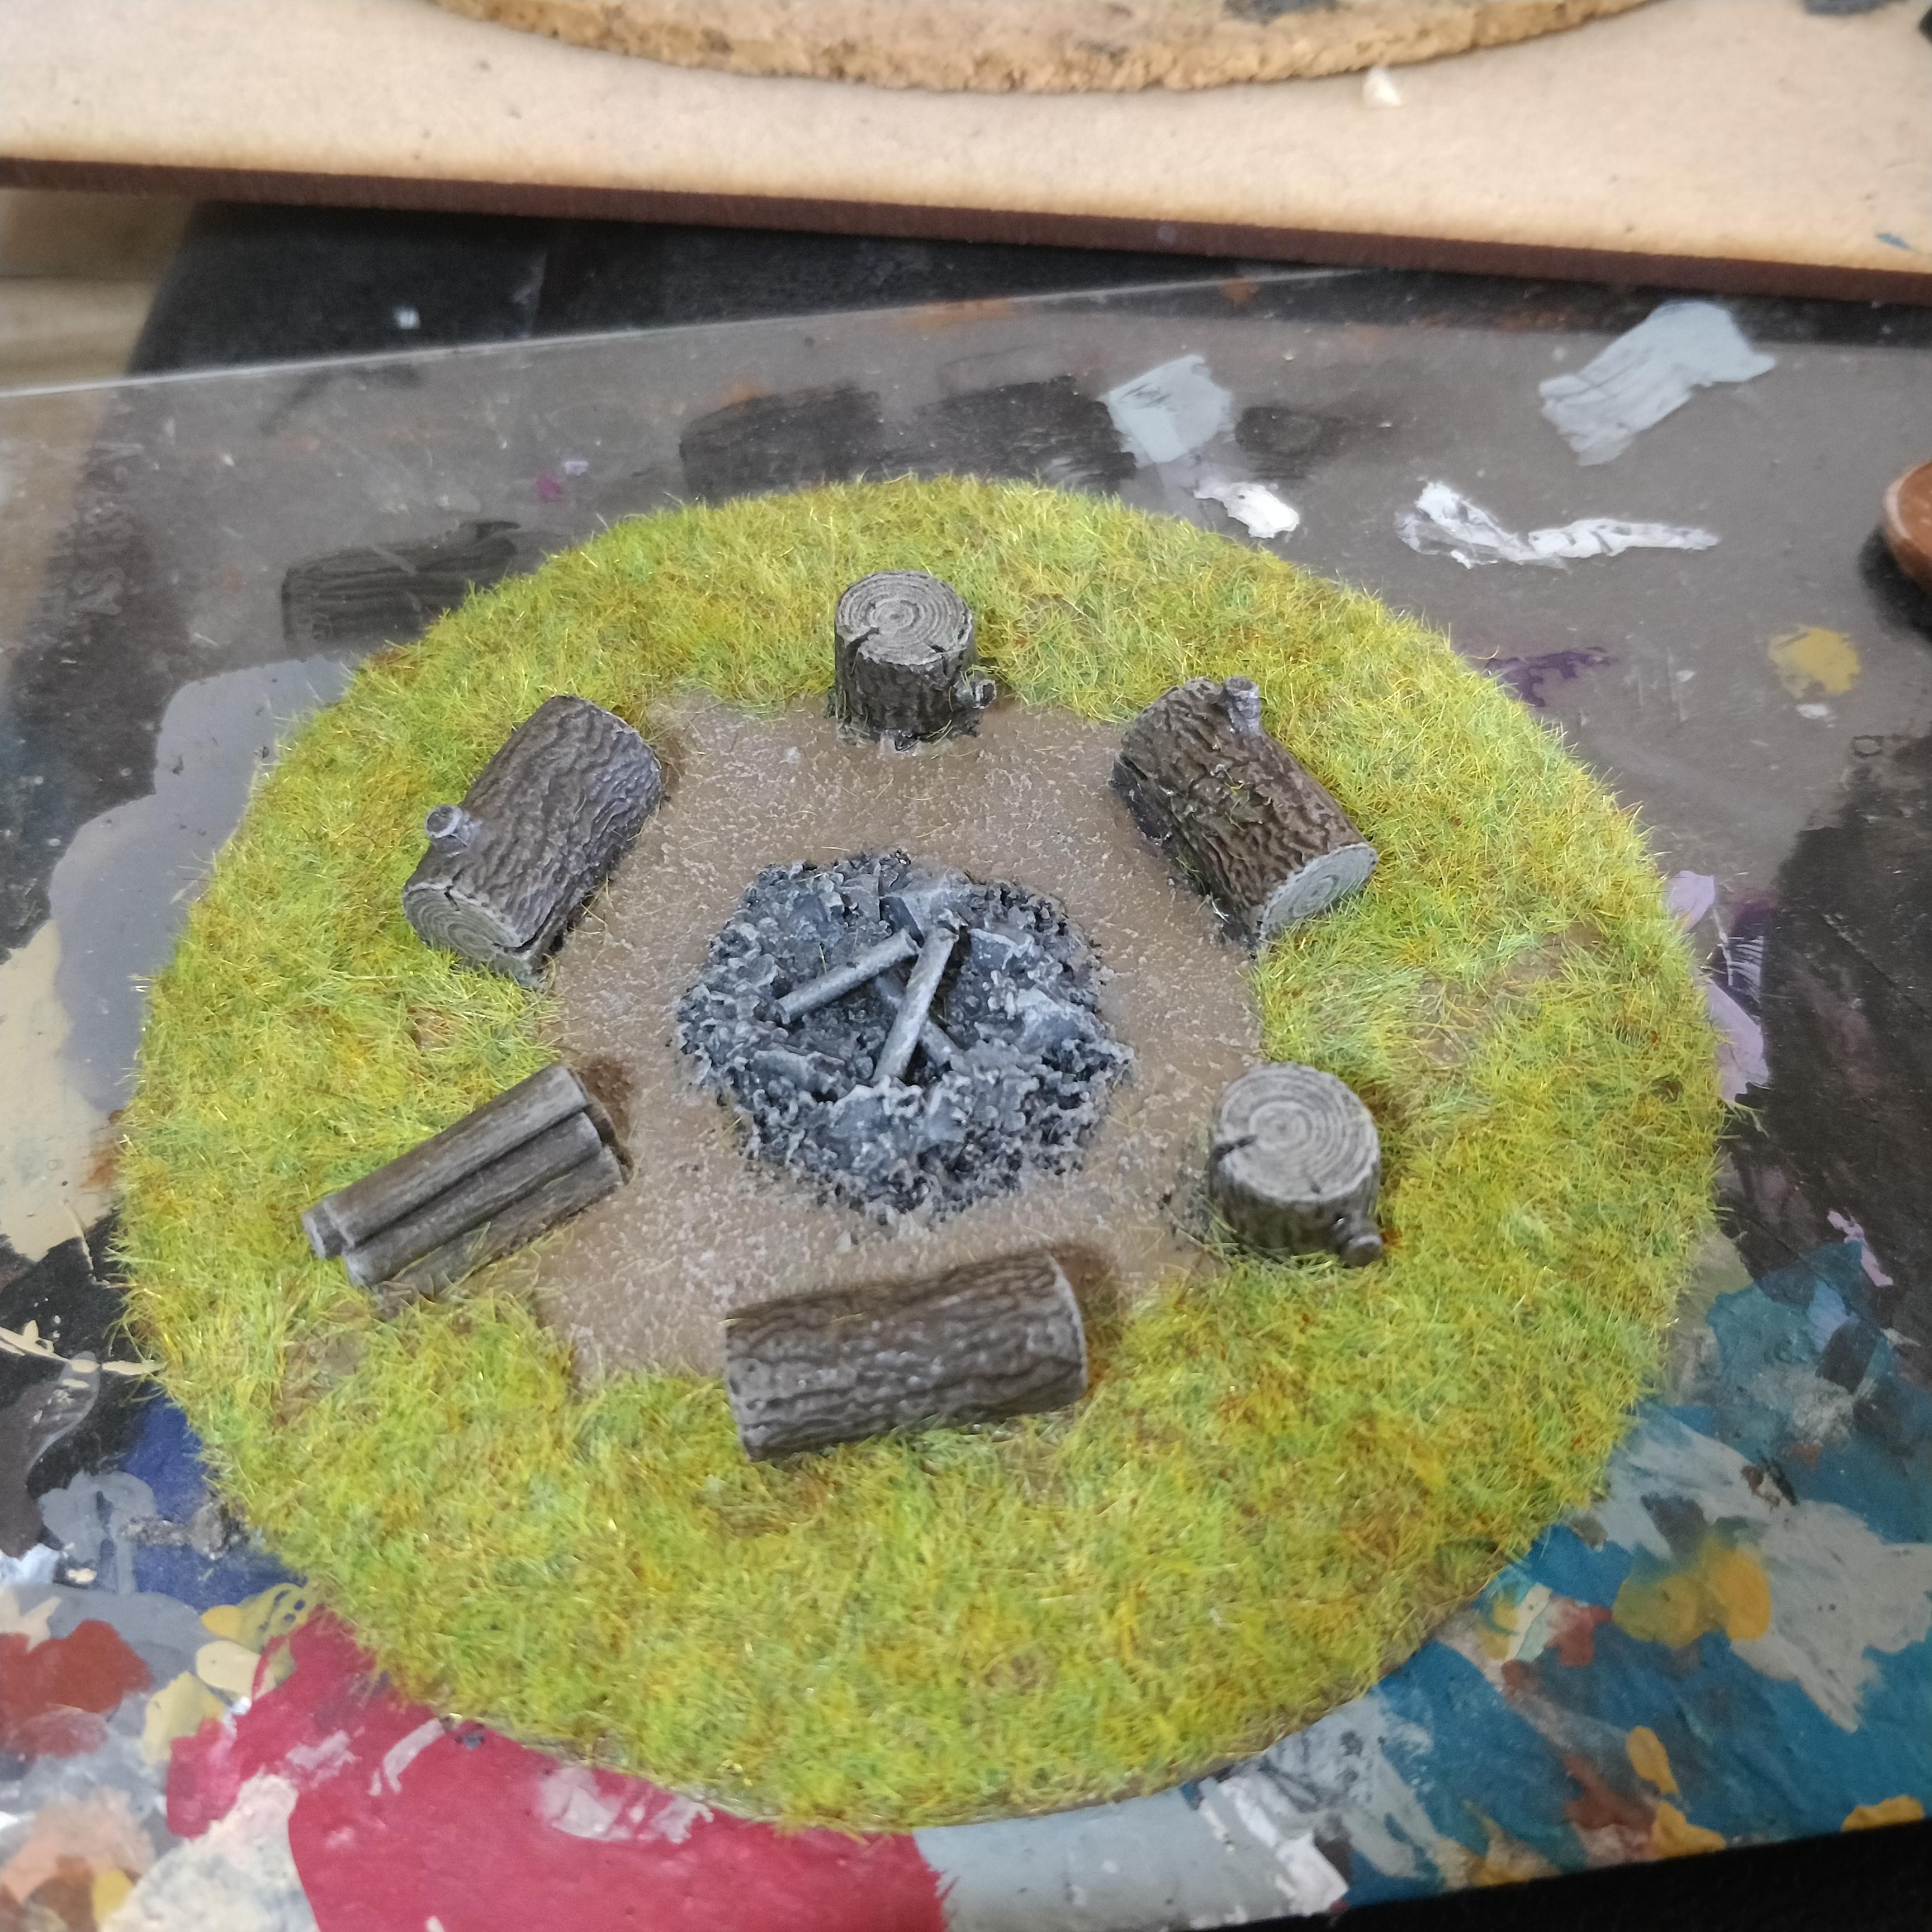 Camp, Campfire, Dungeons And Dragons, Scatter Terrain, Tree Stump, Tt Combat